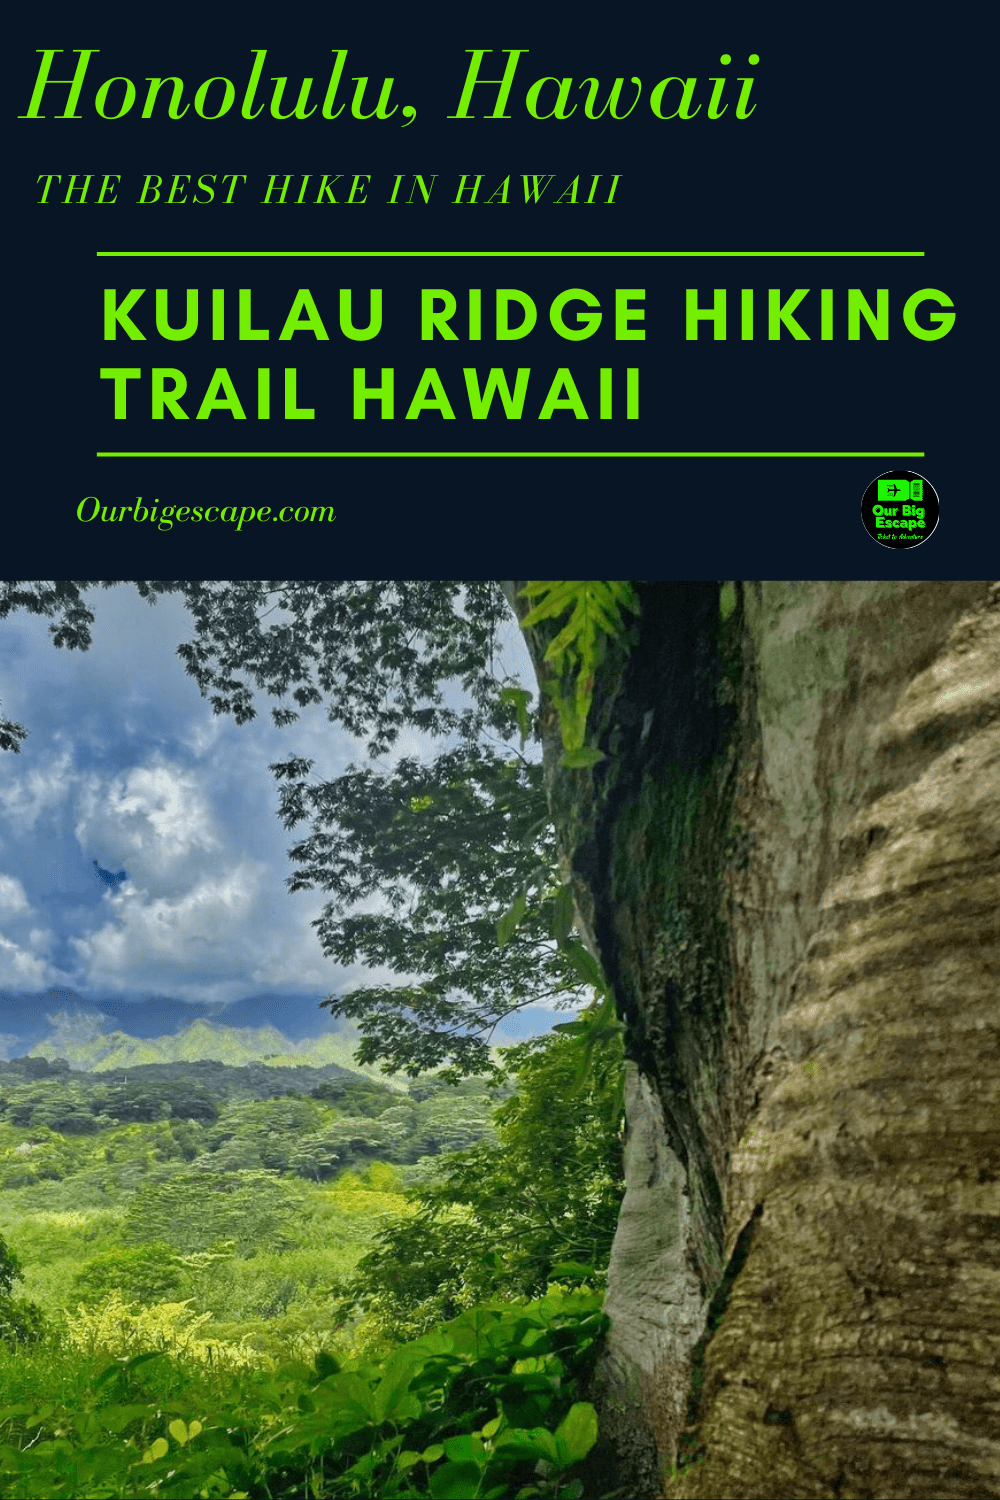 Find out about the 3.6-mile Kuilau Ridge Trail near Kapa'a, Kauai, that goes out and back. Most people think it is a moderately hard route. It takes an average of 1 hour and 43 minutes to finish. This is a popular place to hike, ride horses, and mountain bike, so you'll probably see other people while you're out exploring. The trail is beautiful and can be used at any time of the year.